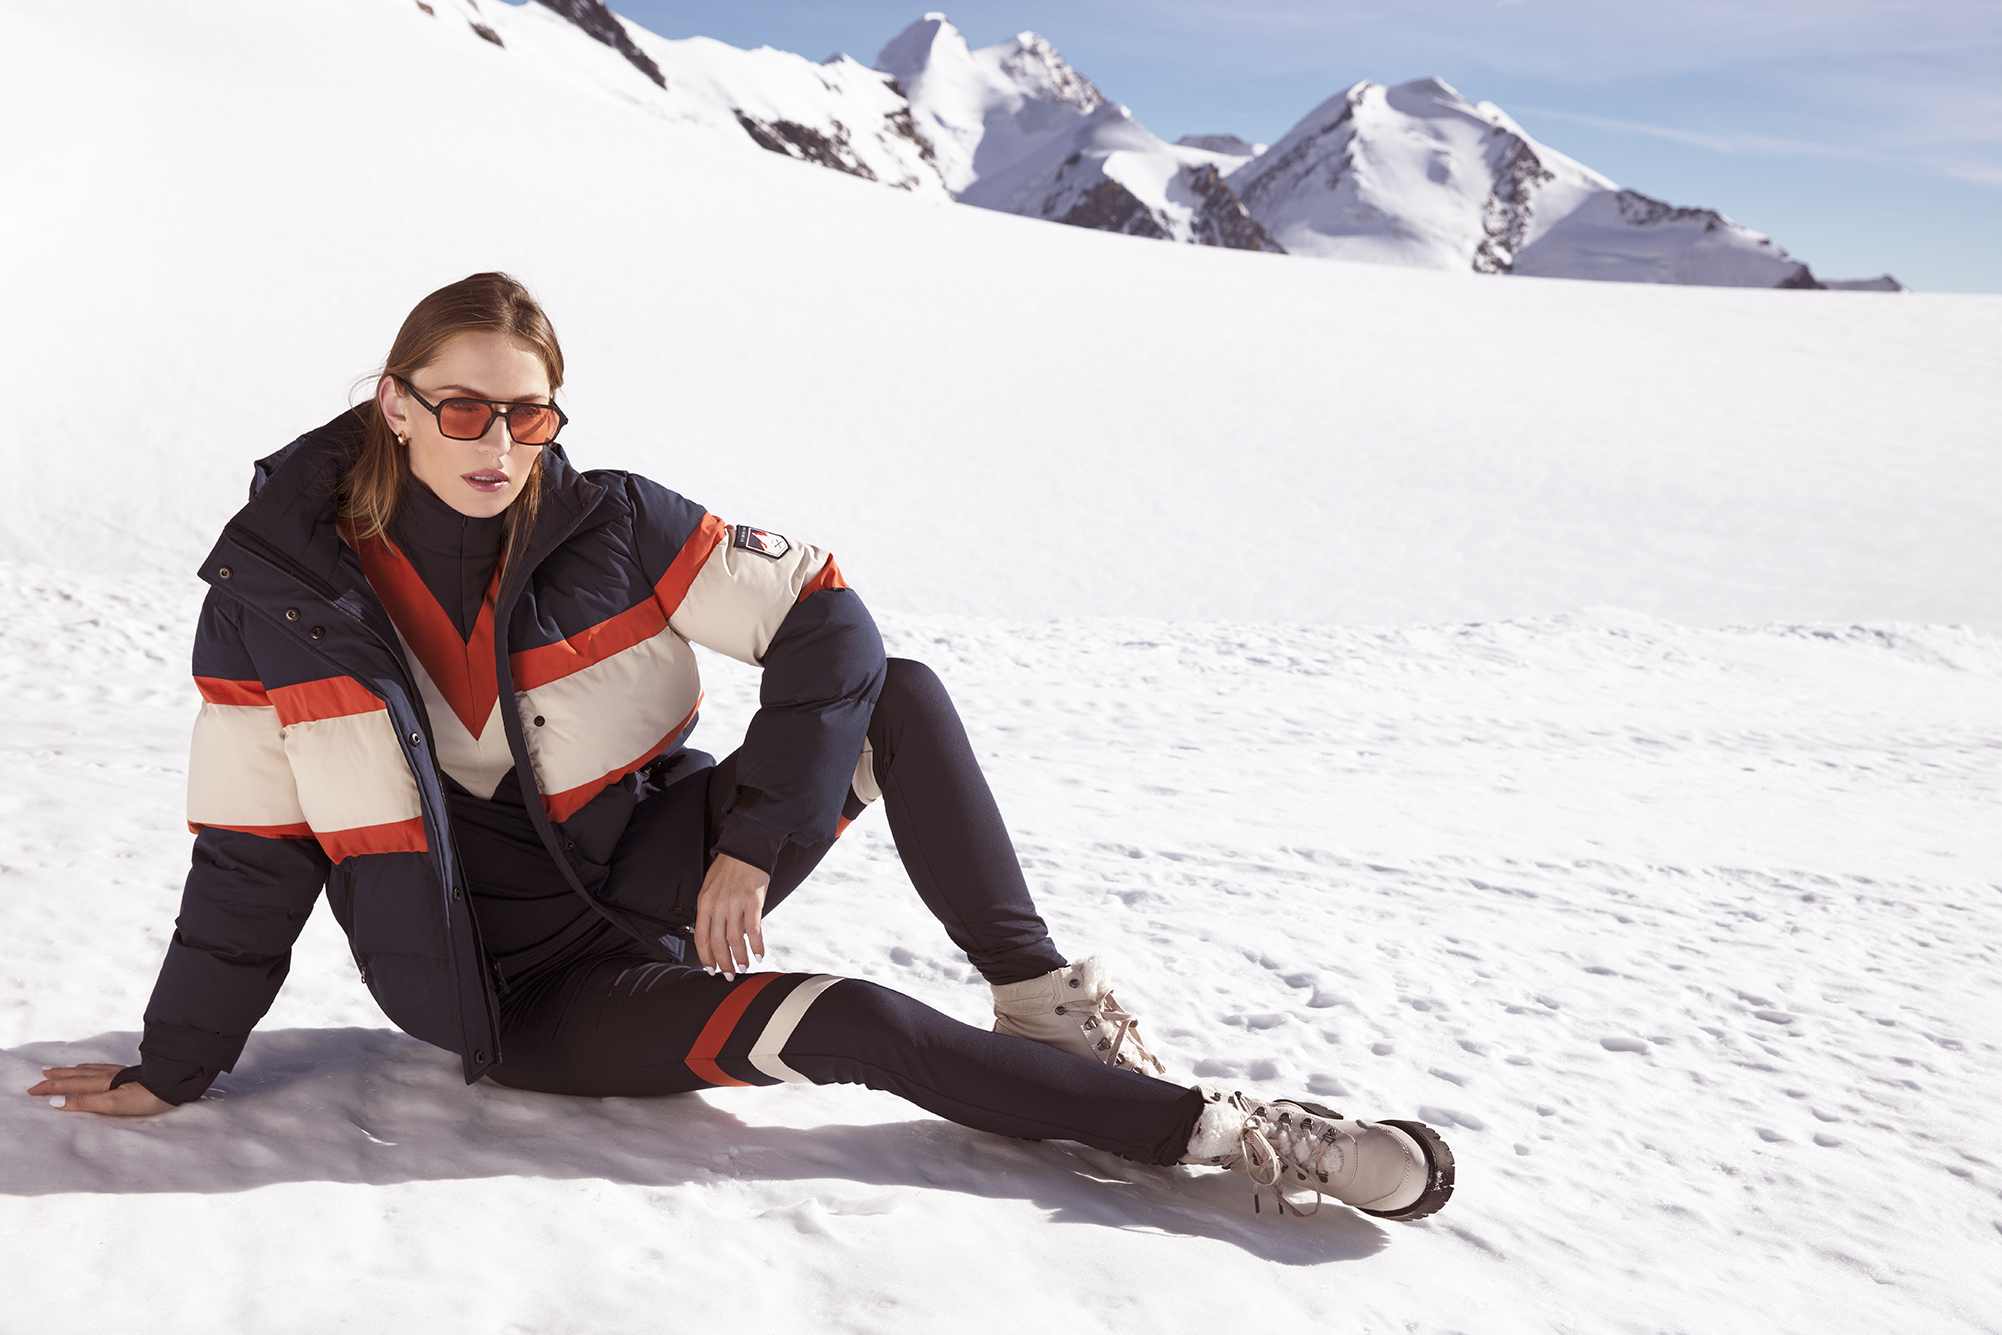 Why The Ski Capsule from By Malina is the ultimate ski collection you need for winter 21/22. 90